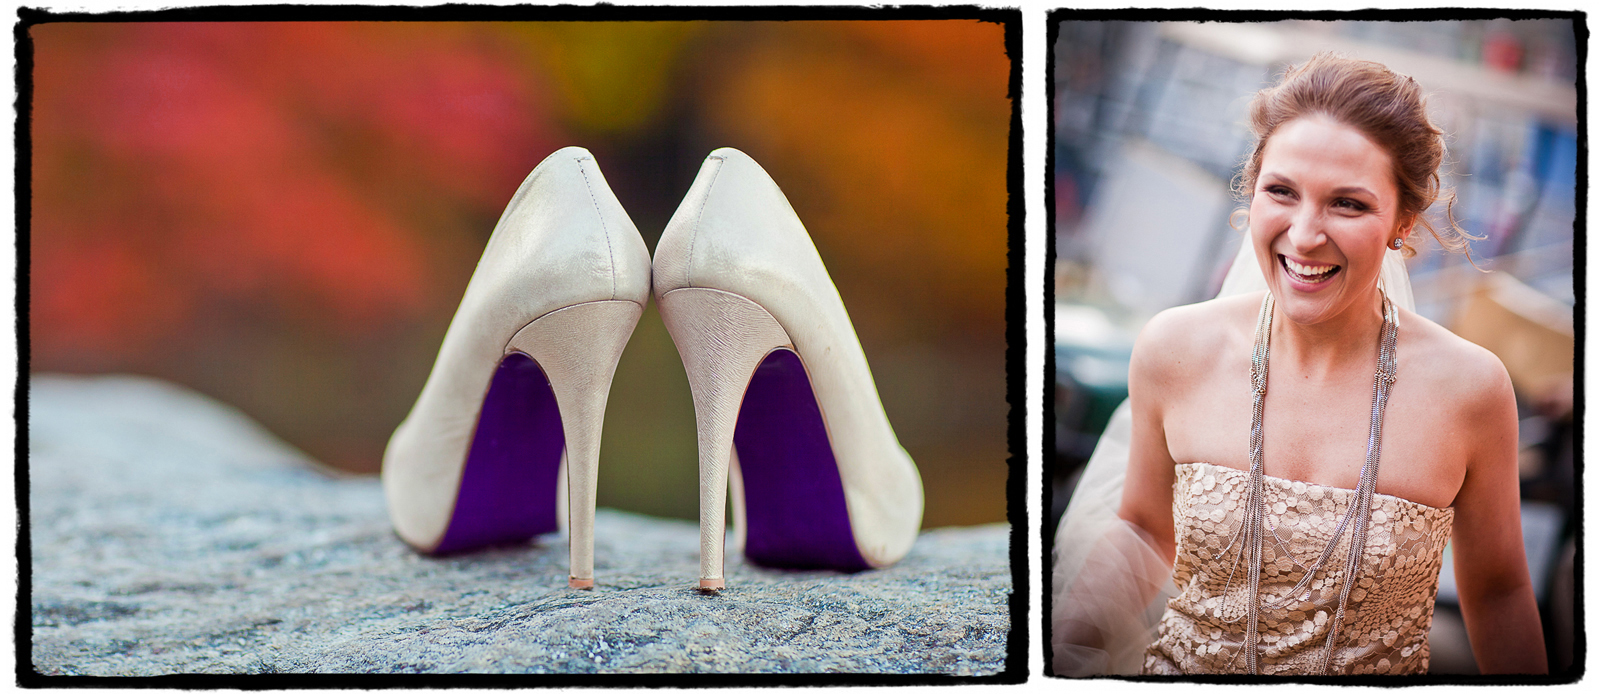 beautiful wedding shoes and a unique necklace were a stylish complement to the gold lace gown at this central park elopement ceremony.